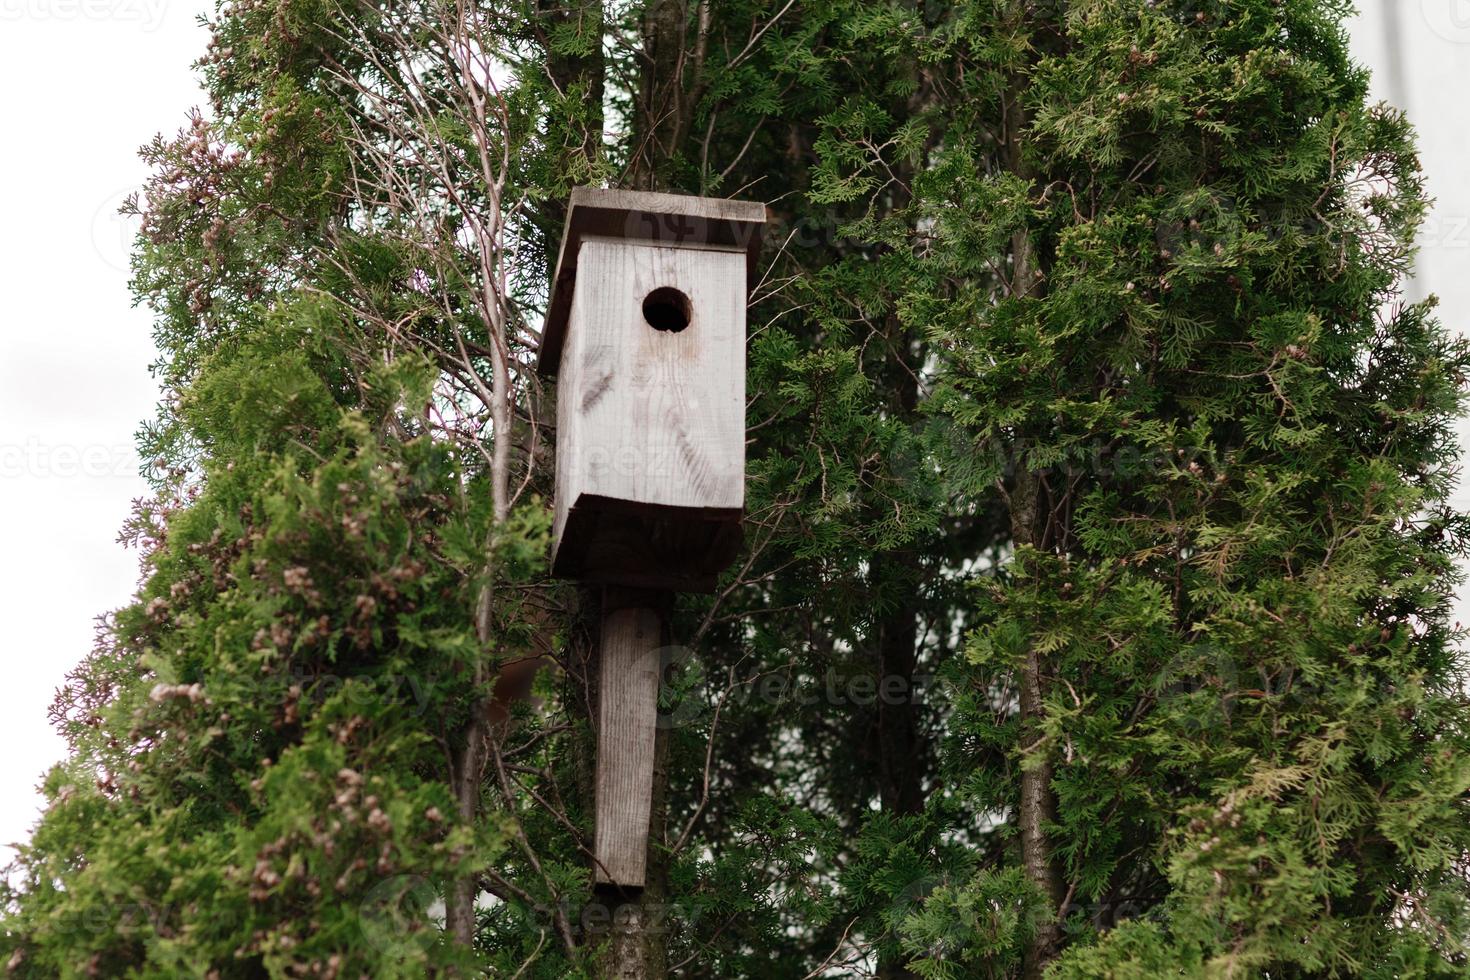 tree house for birds on the tree, birdhouse from the tree for wintering birds photo